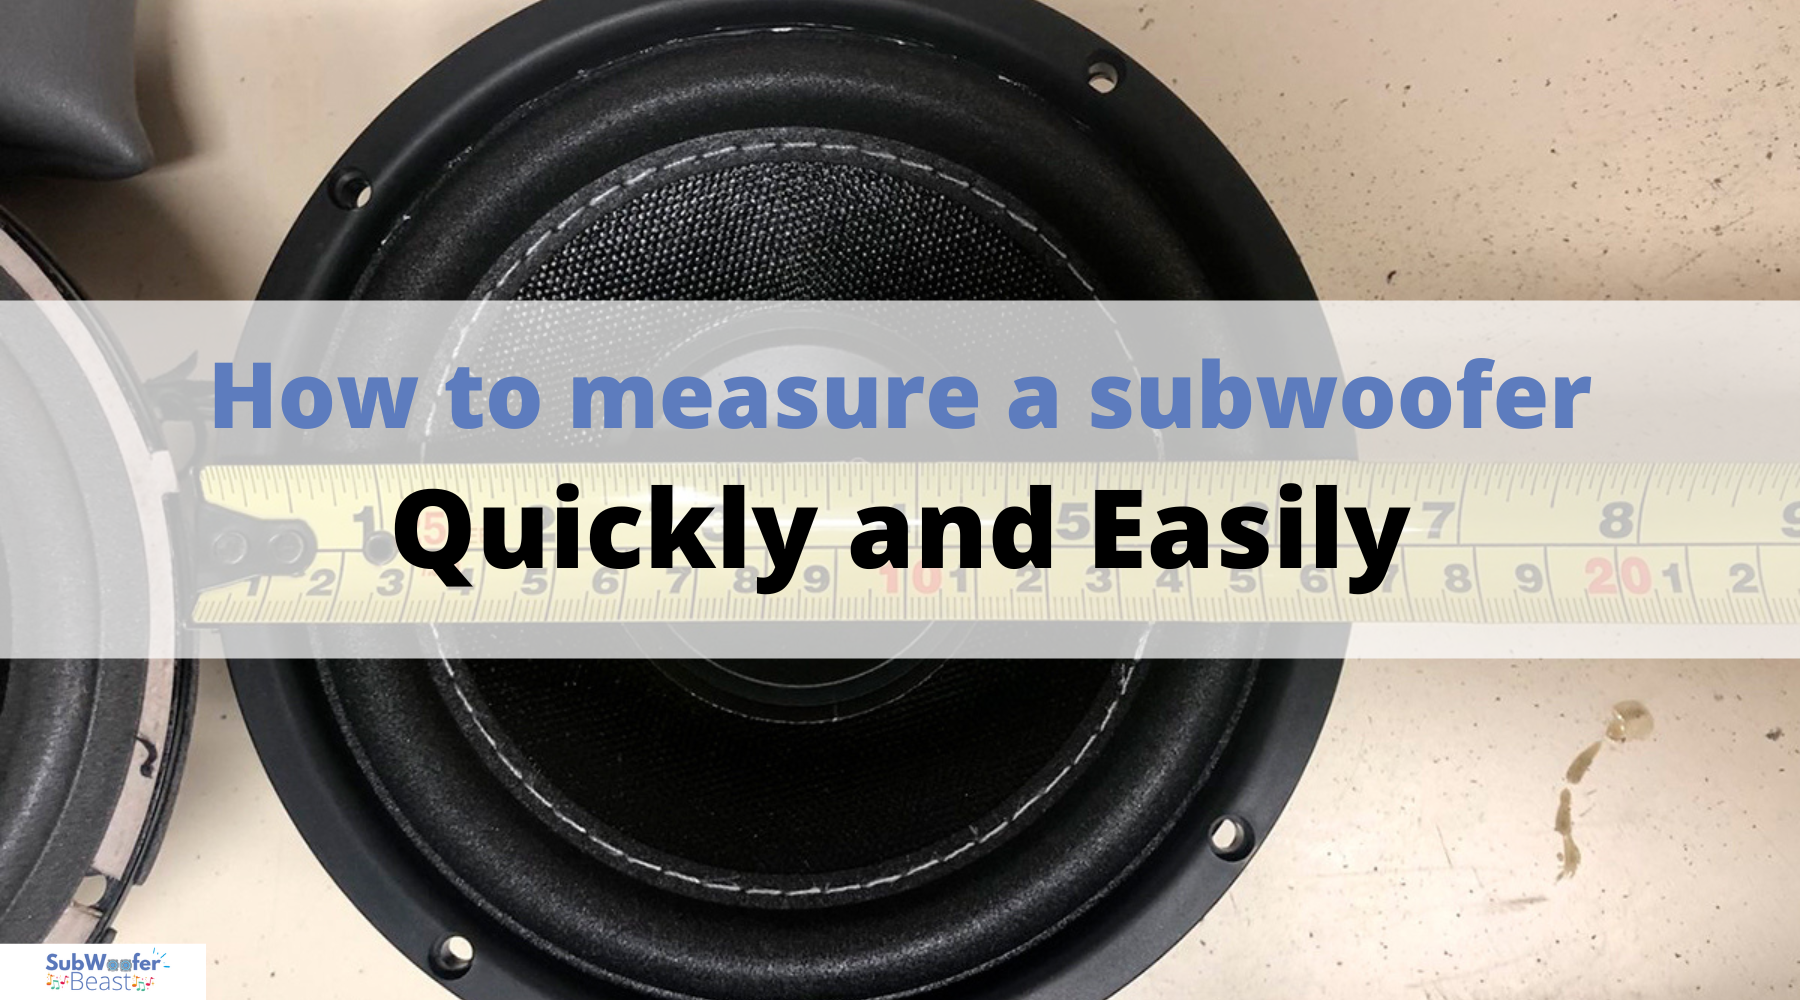 How to measure a subwoofer